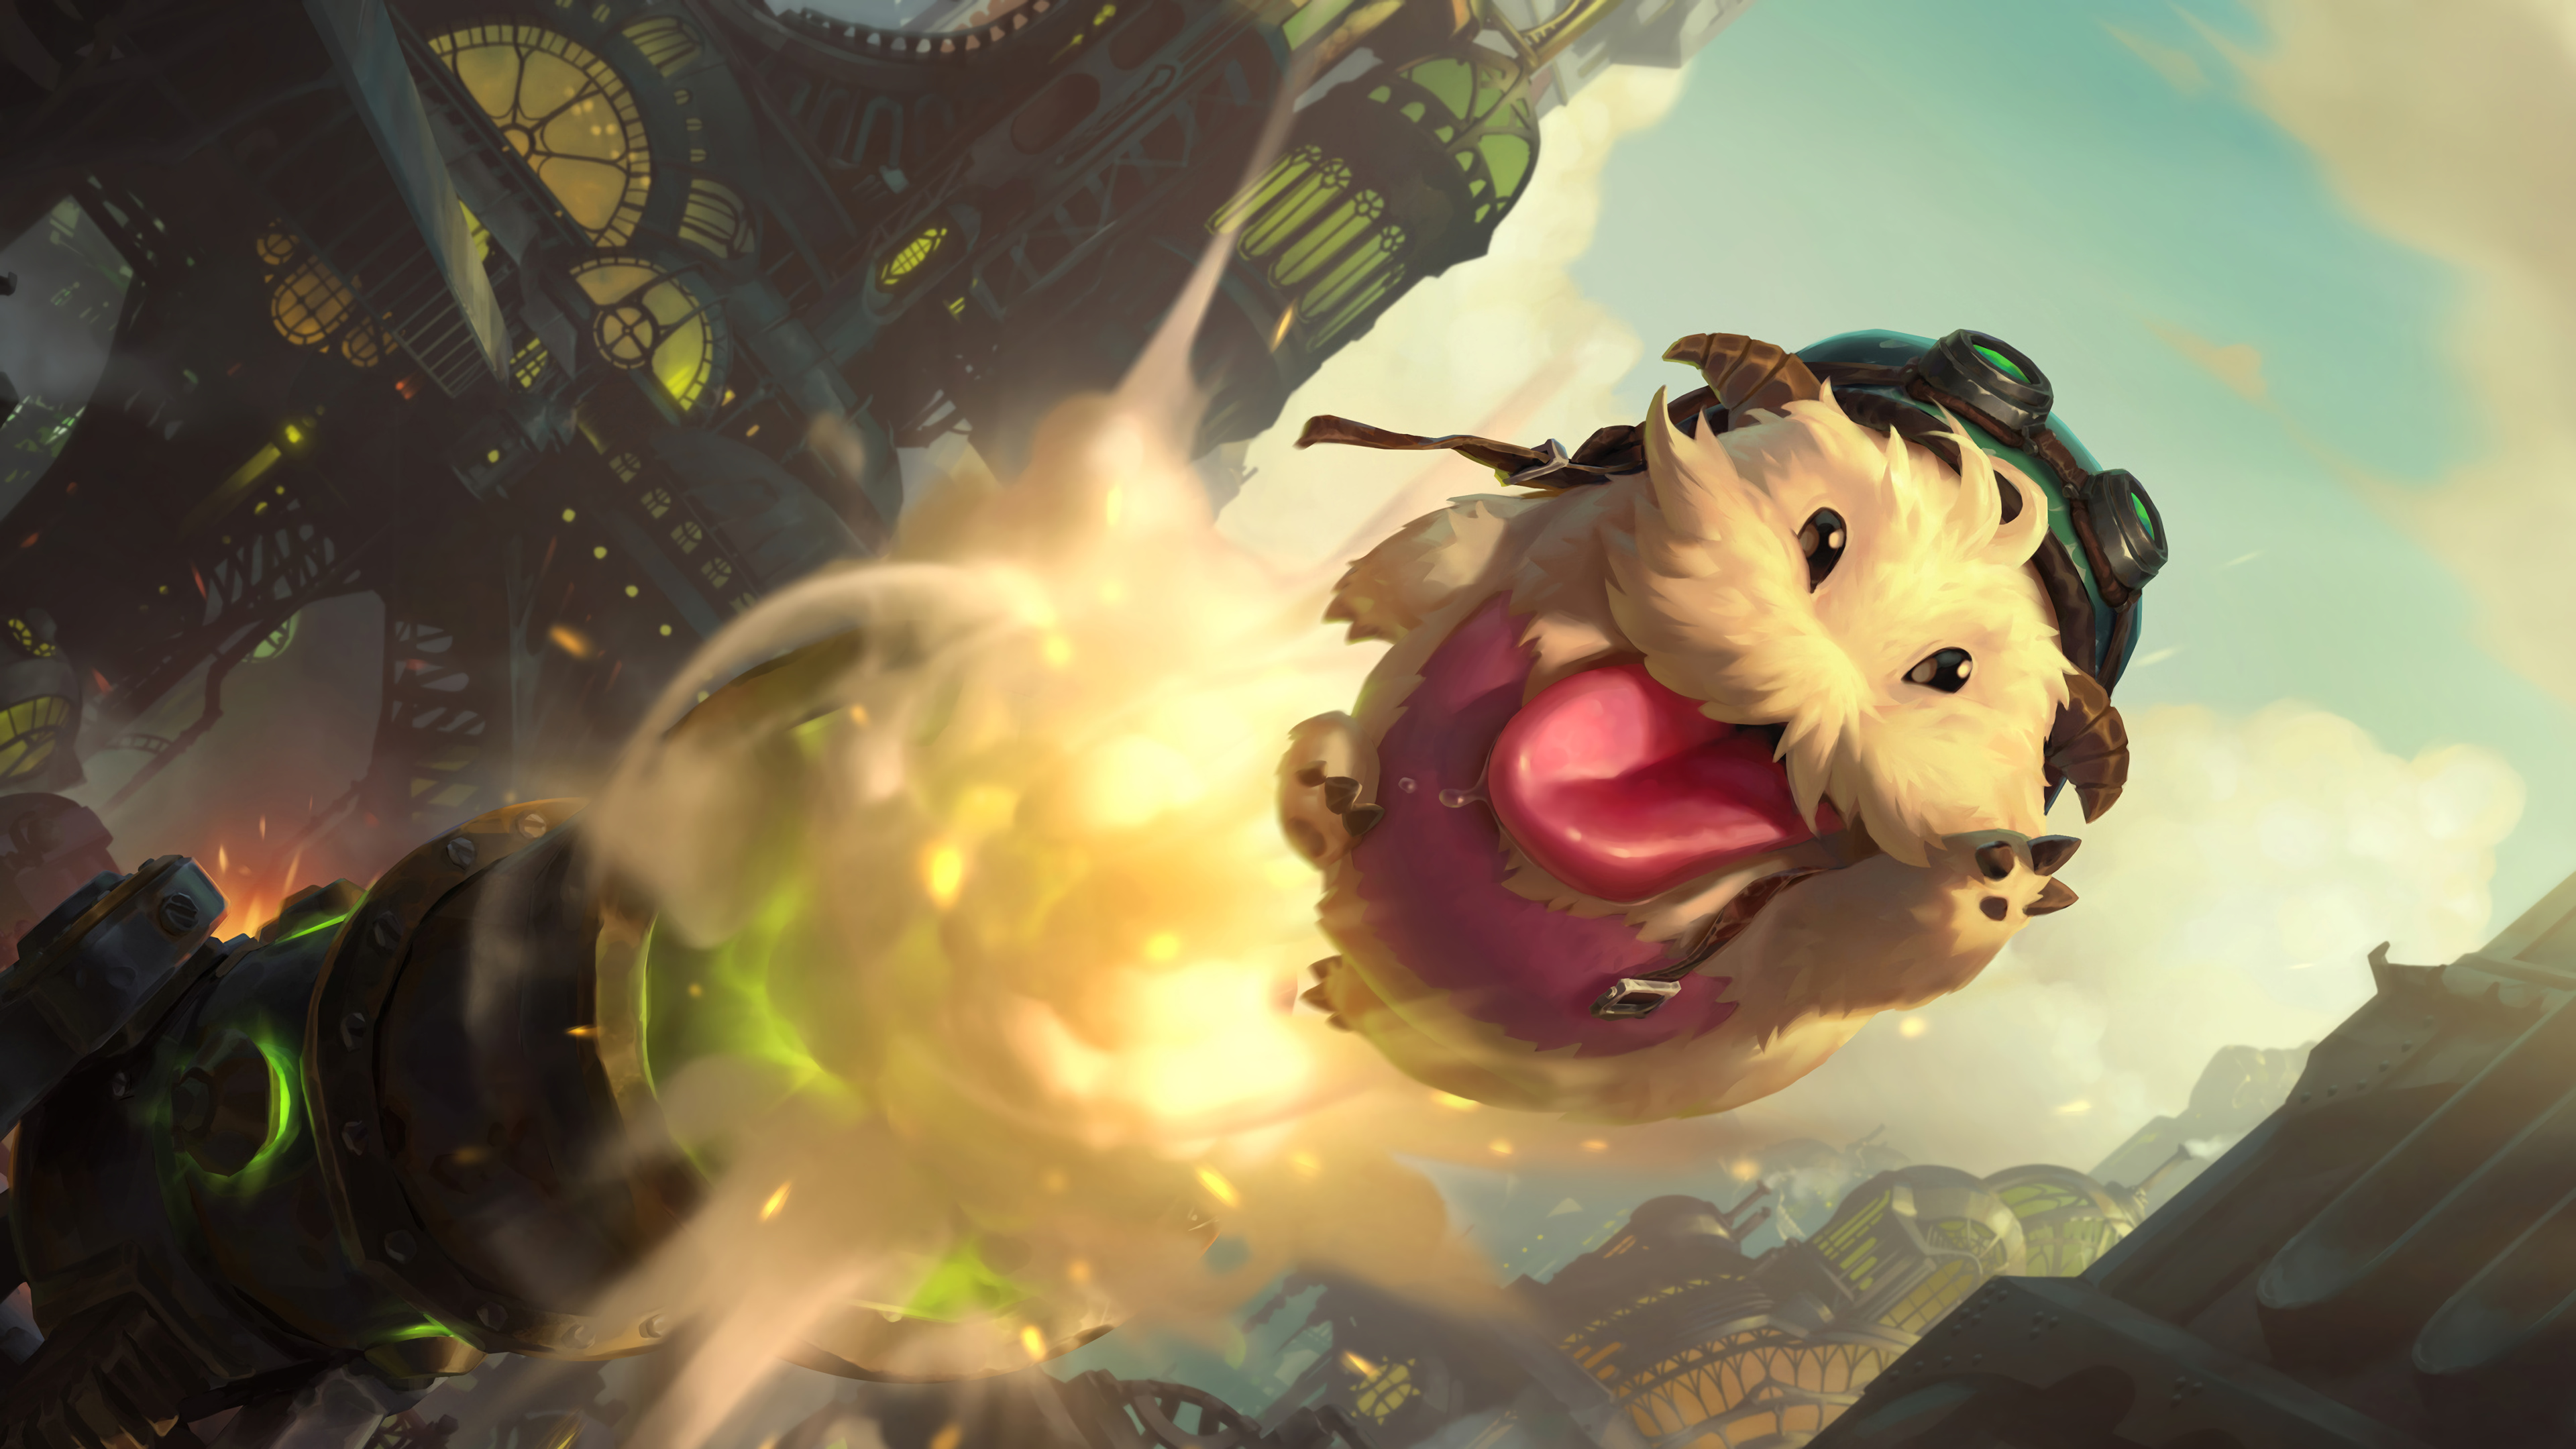 General 3840x2160 League of Legends Legends of Runeterra Poro Riot Games video game characters video games